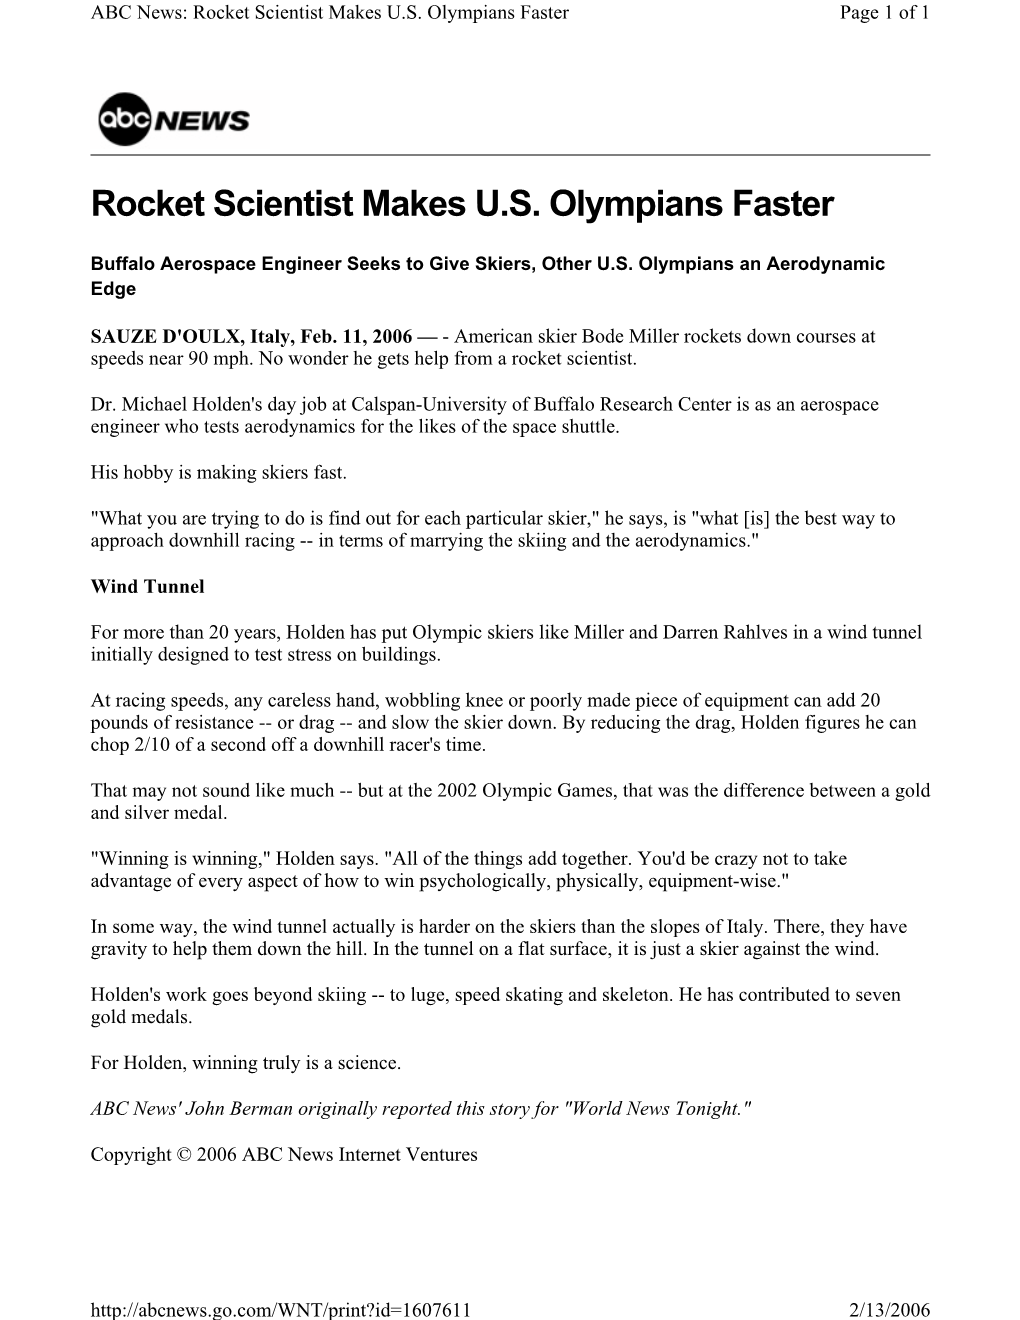 Rocket Scientist Makes U.S. Olympians Faster Page 1 of 1